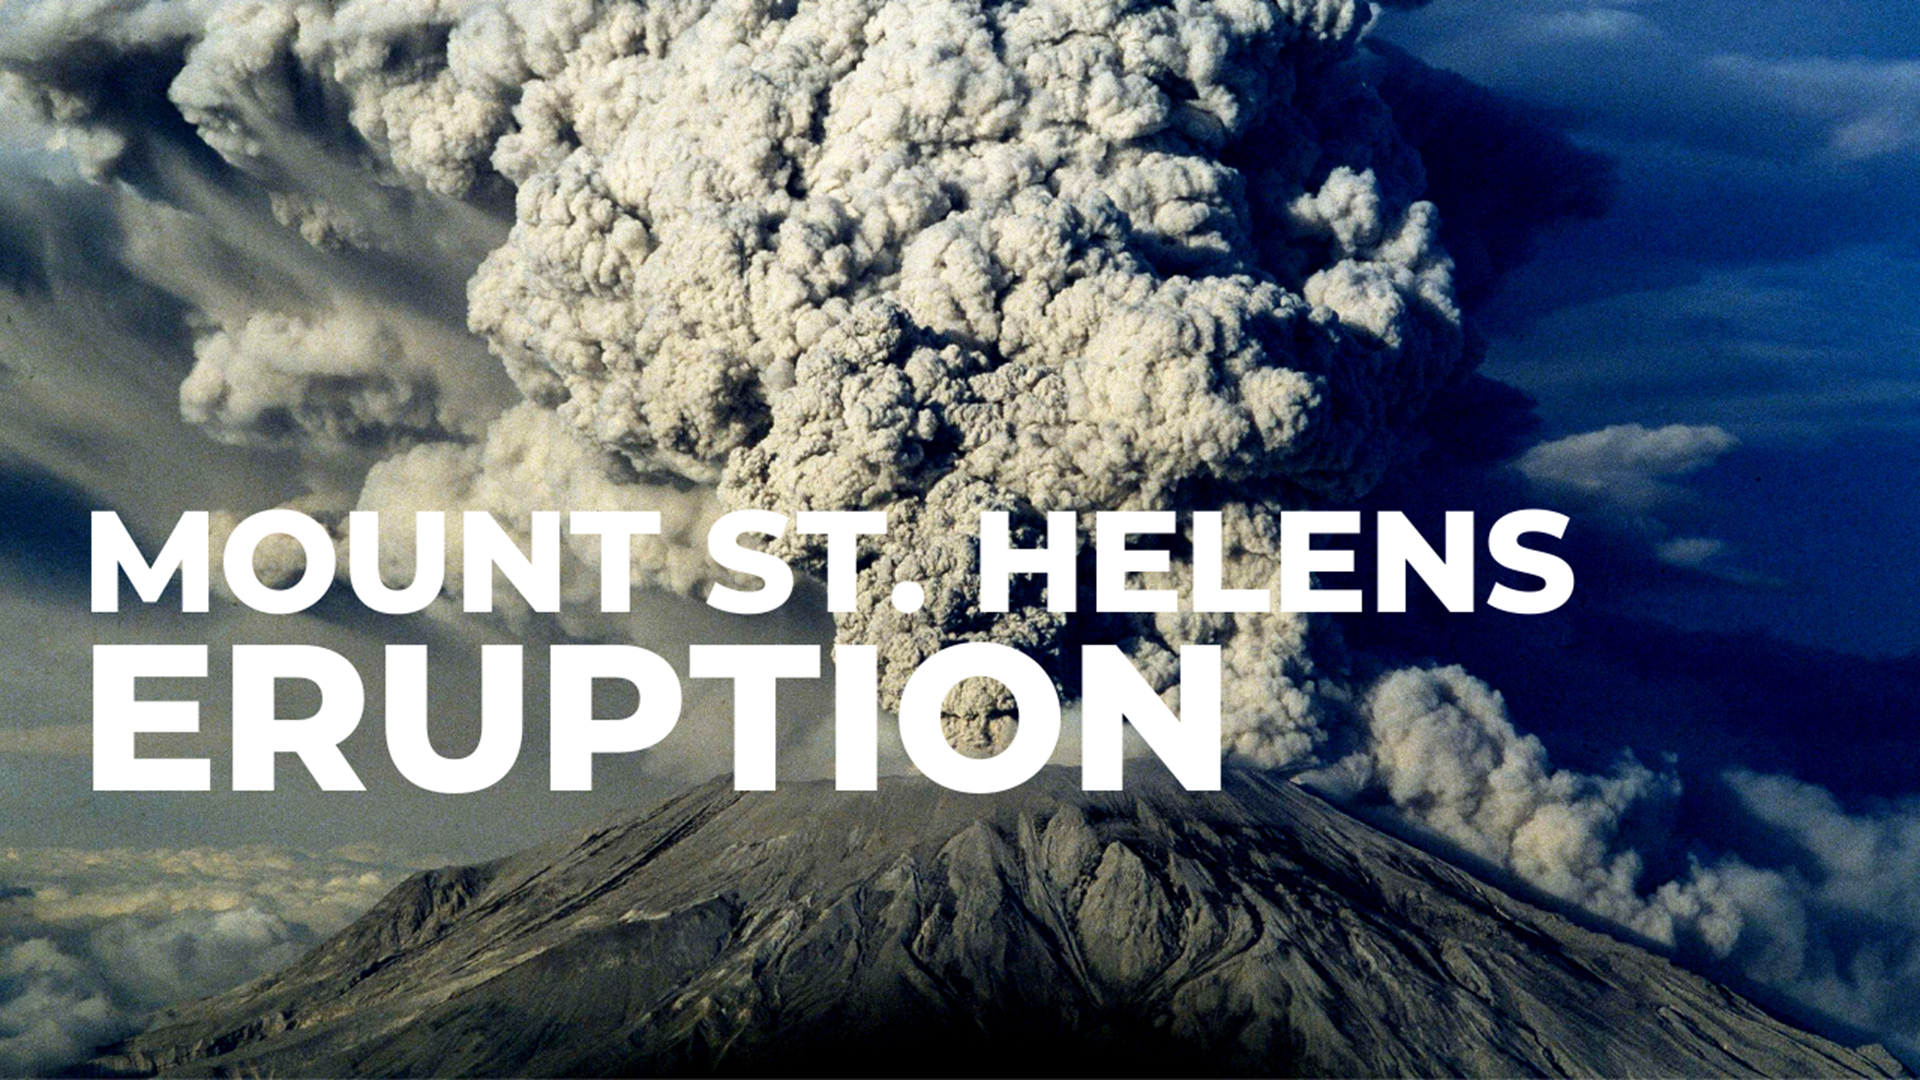 On the morning of May 18, 1980, Mount St. Helens erupted. It was the deadliest volcanic event in U.S. history. Nina Mehlhaf revisits the coverage of the eruption.